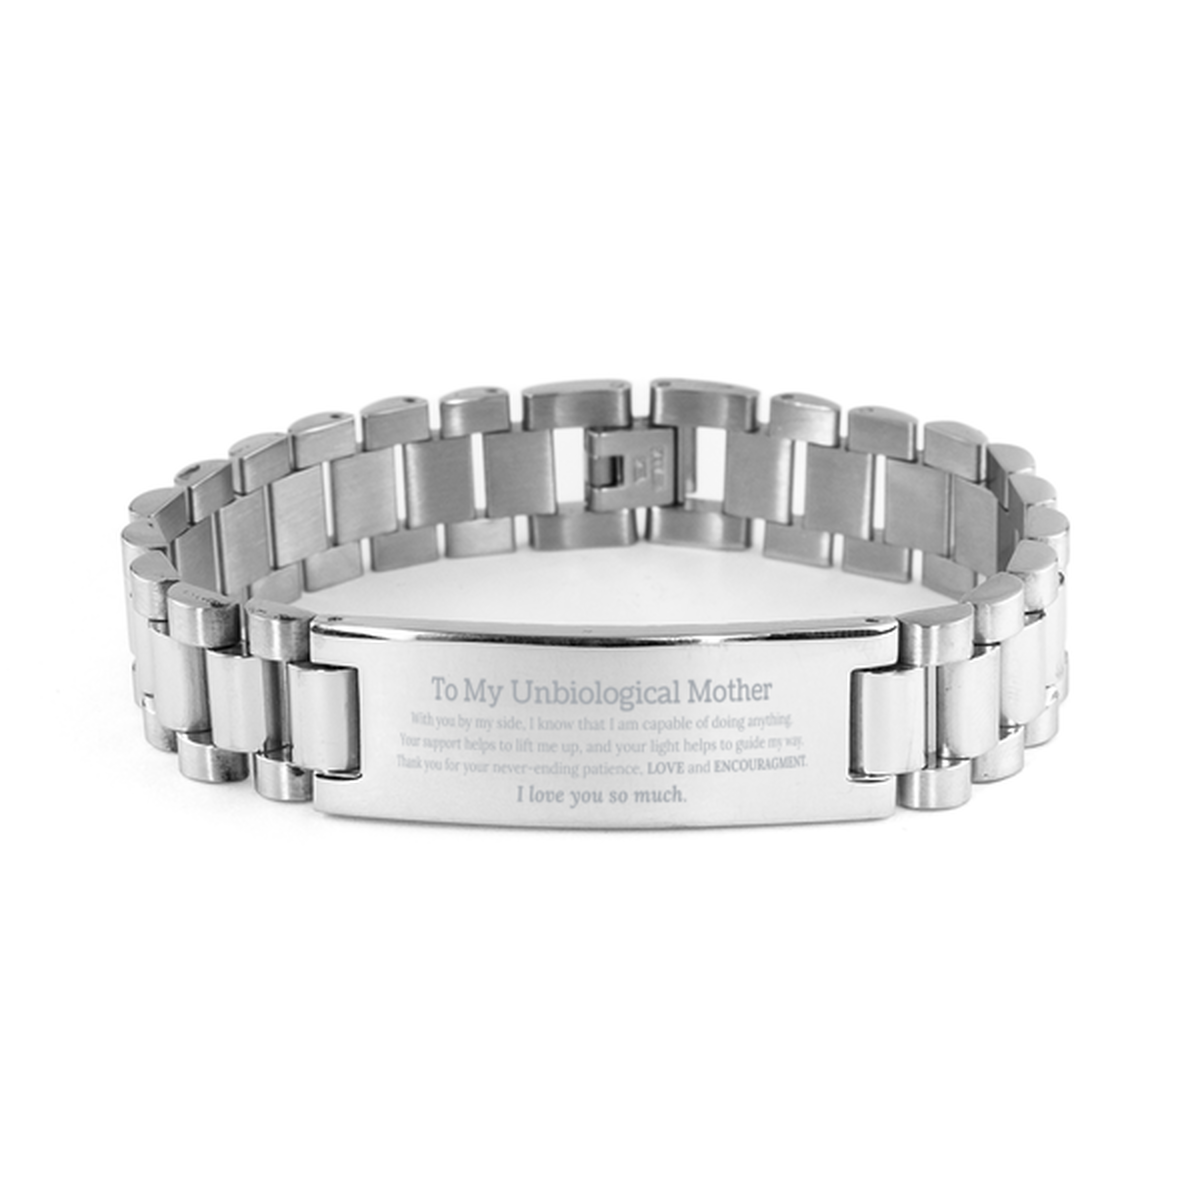 Appreciation Unbiological Mother Ladder Stainless Steel Bracelet Gifts, To My Unbiological Mother Birthday Christmas Wedding Keepsake Gifts for Unbiological Mother With you by my side, I know that I am capable of doing anything. I love you so much